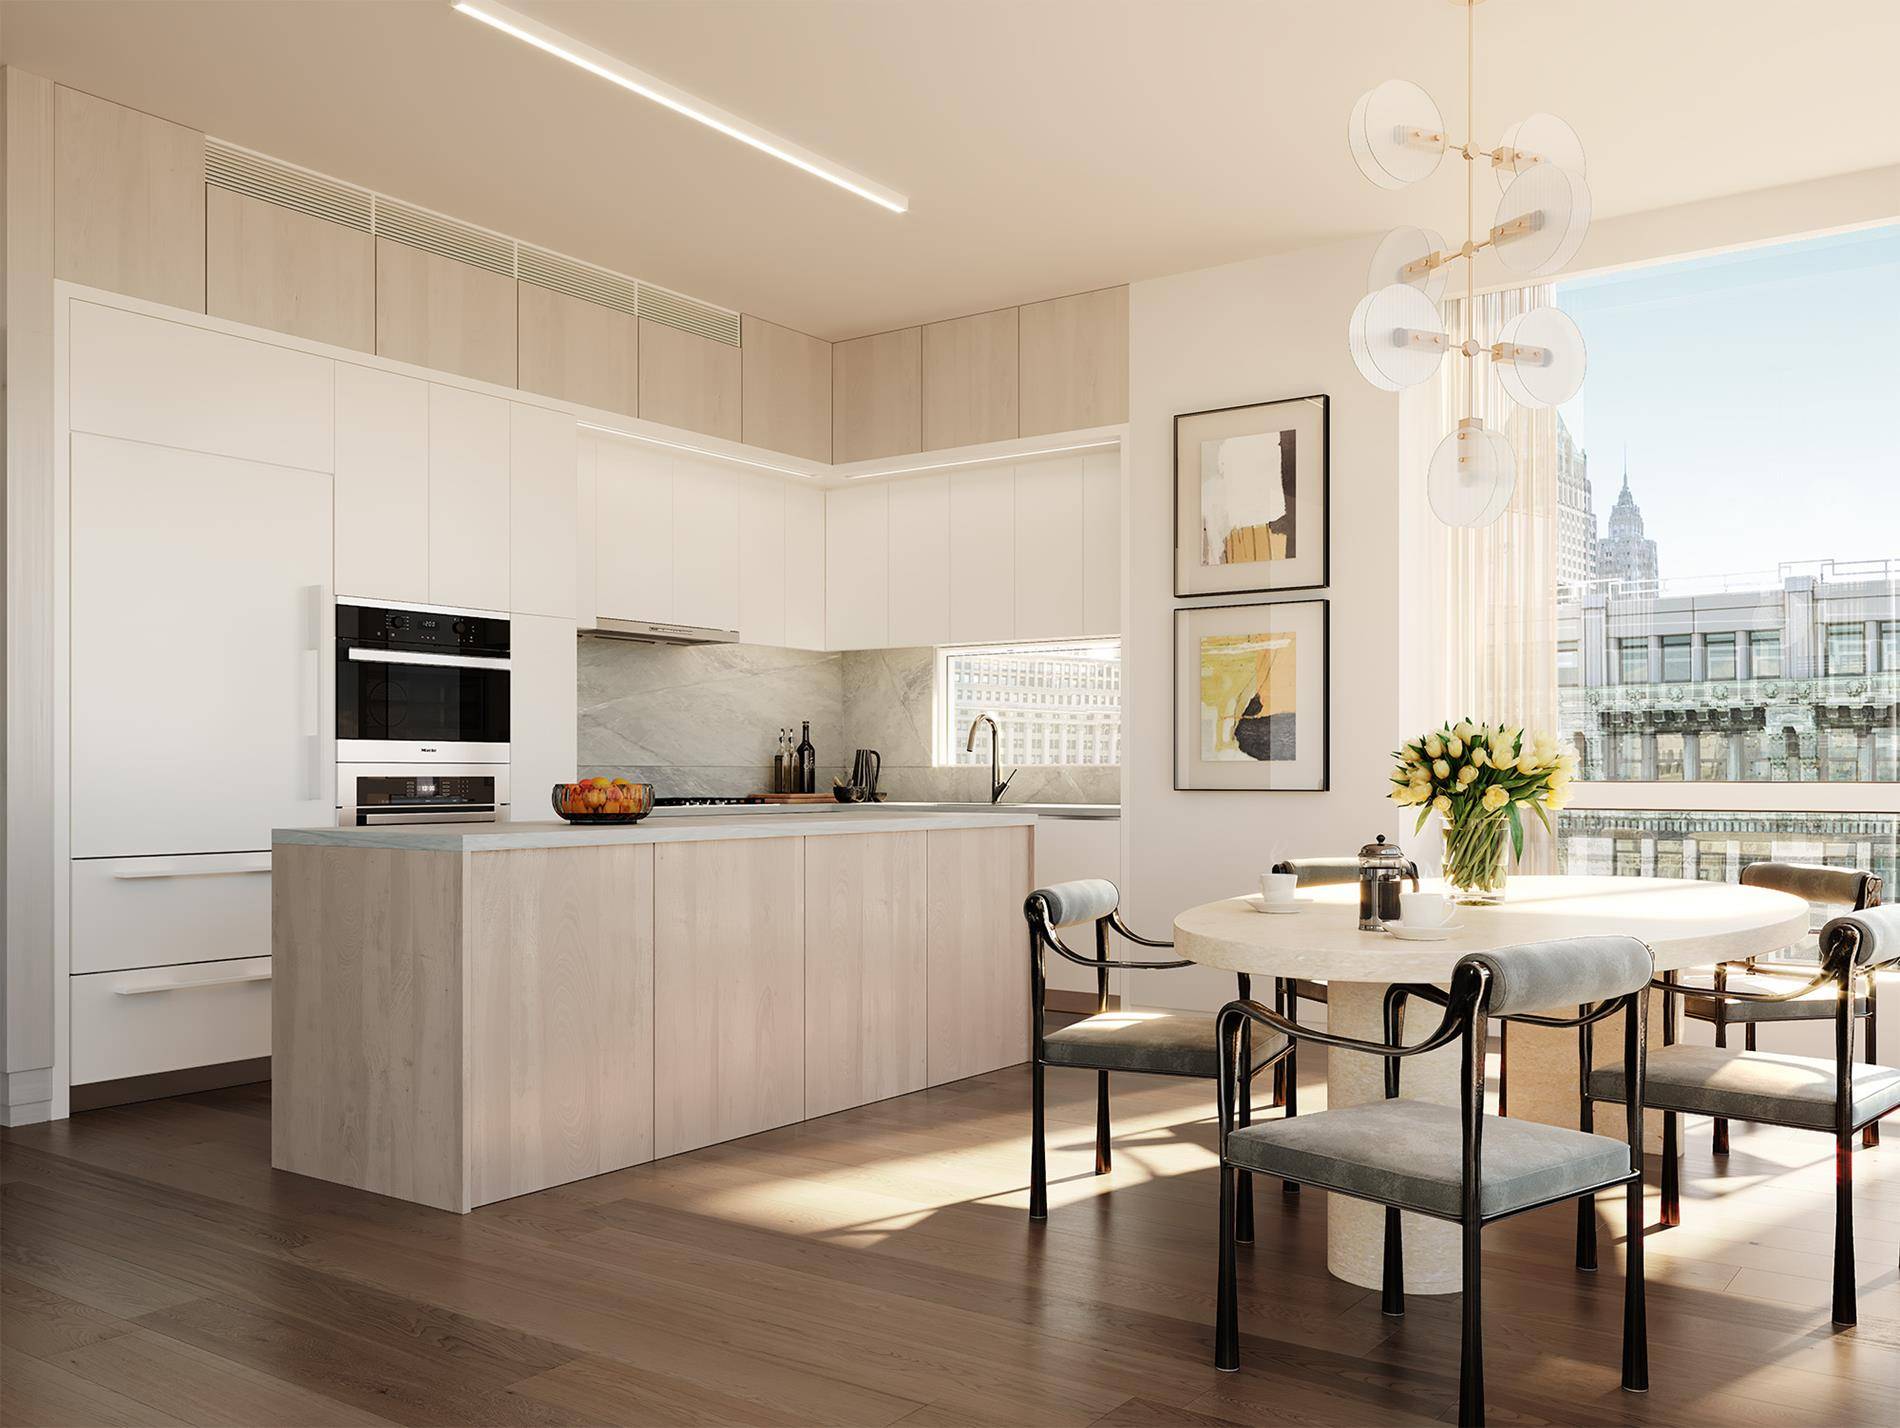 SALES GALLERY LOCATED AT 17 STATE STREET, 21ST FLOOR77 Greenwich is a radiant collection of 90, one to four bedroom condominium residences envisioned by FXCollaborative and Deborah Berke Partners.